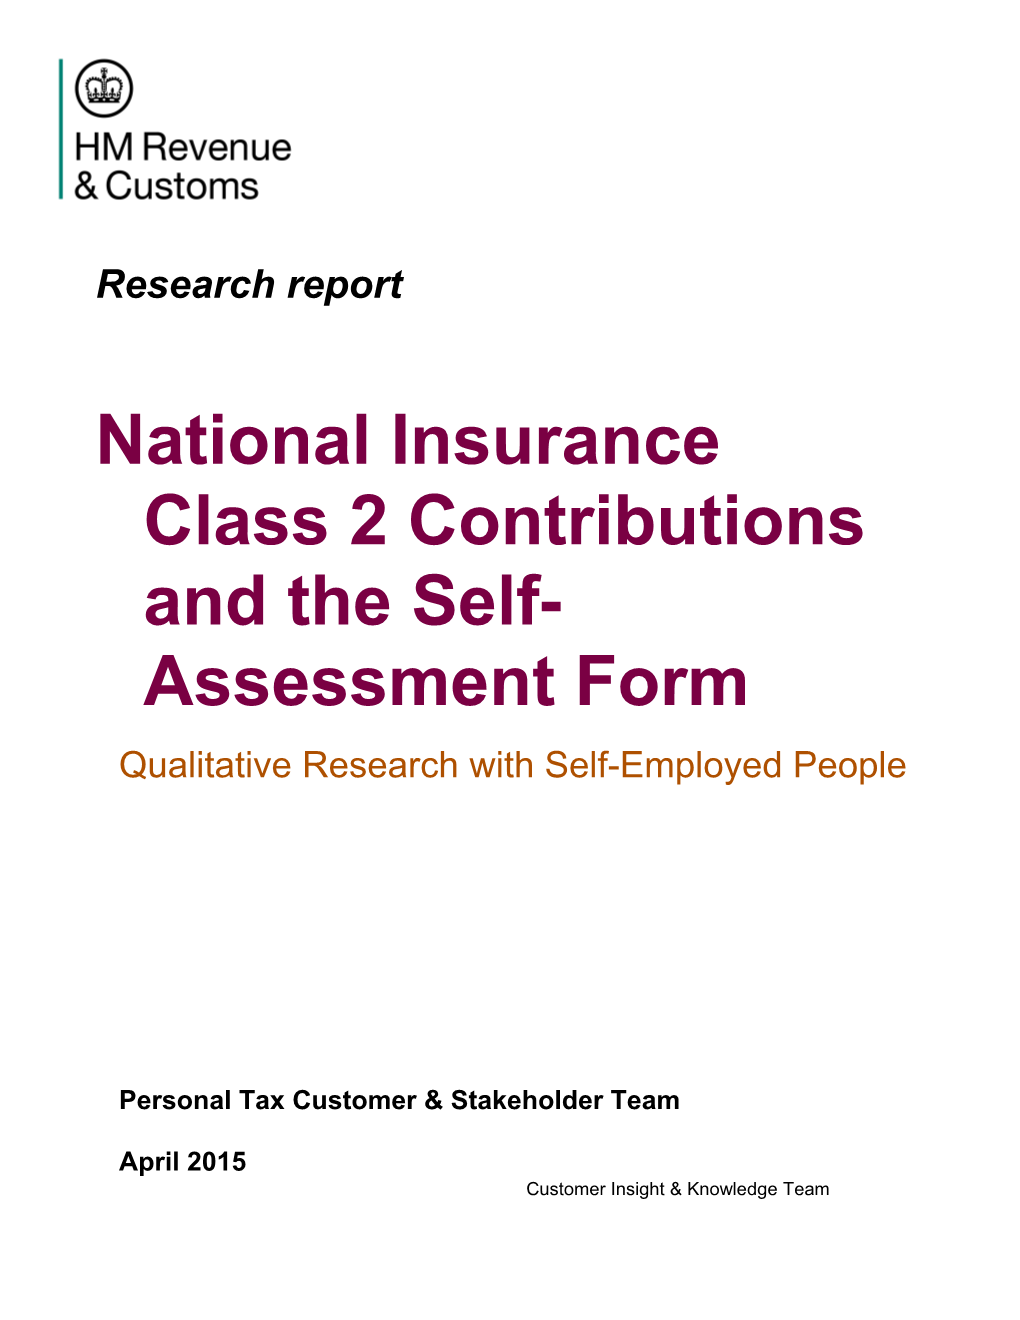 National Insurance Class 2 Contributions and the Self Assessment Form